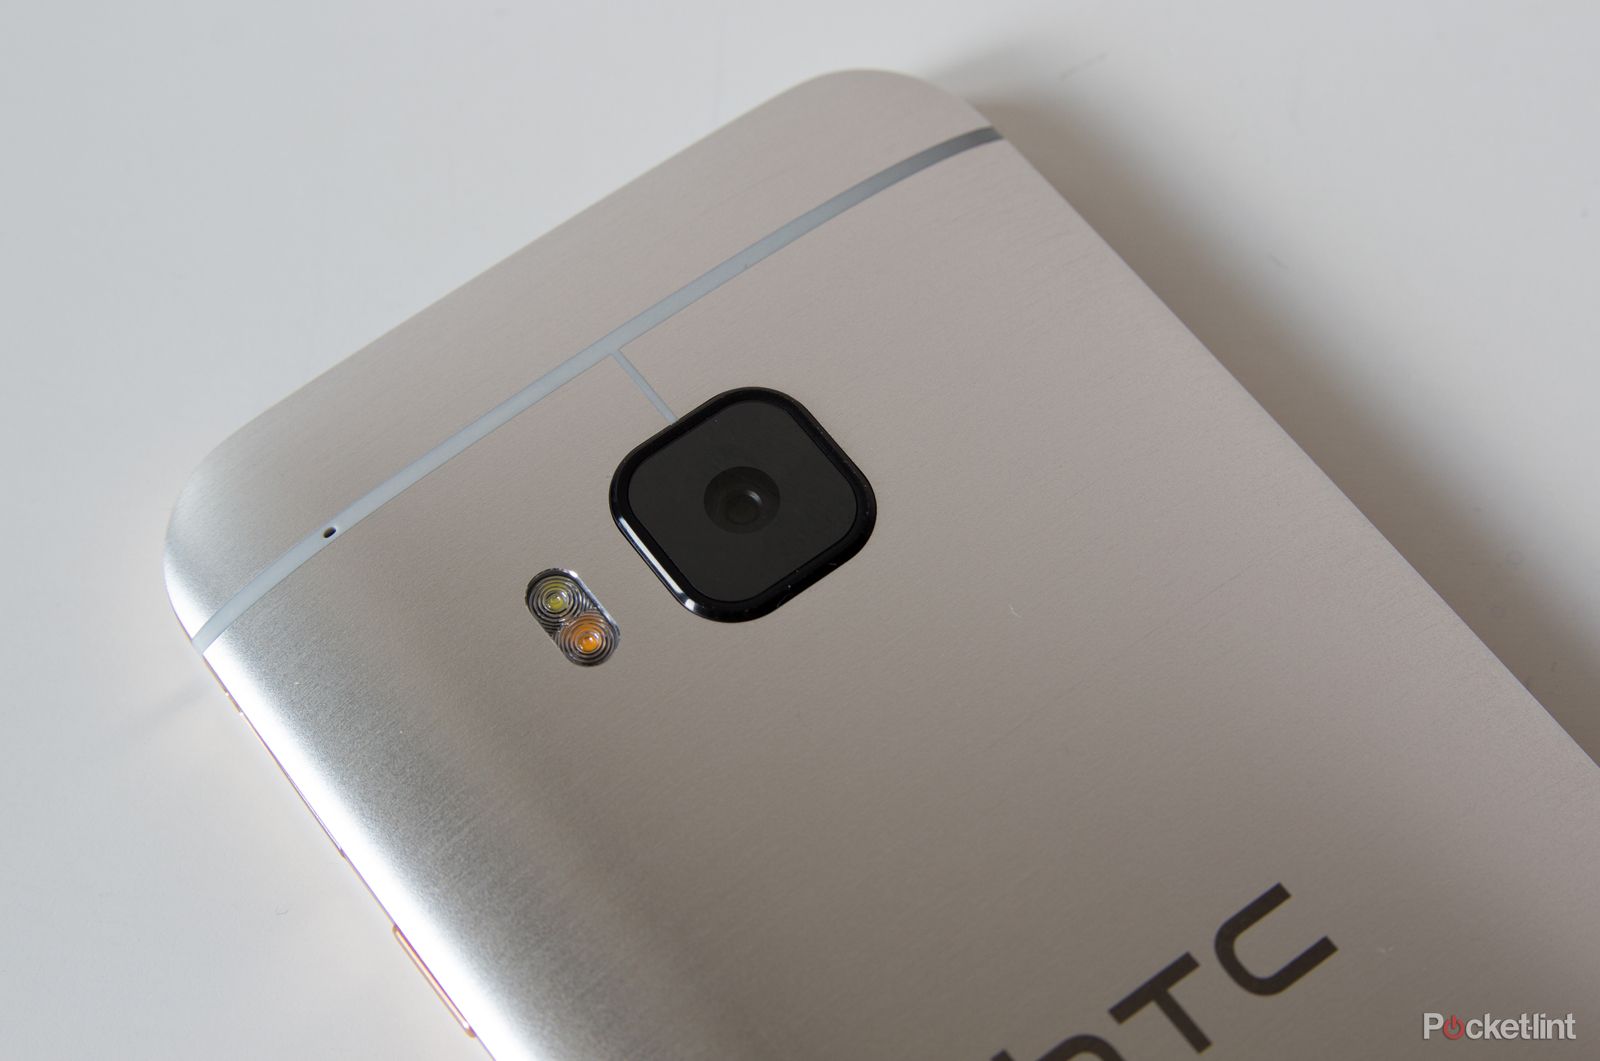 htc aero could be the smartphone to end htc s camera woes image 1